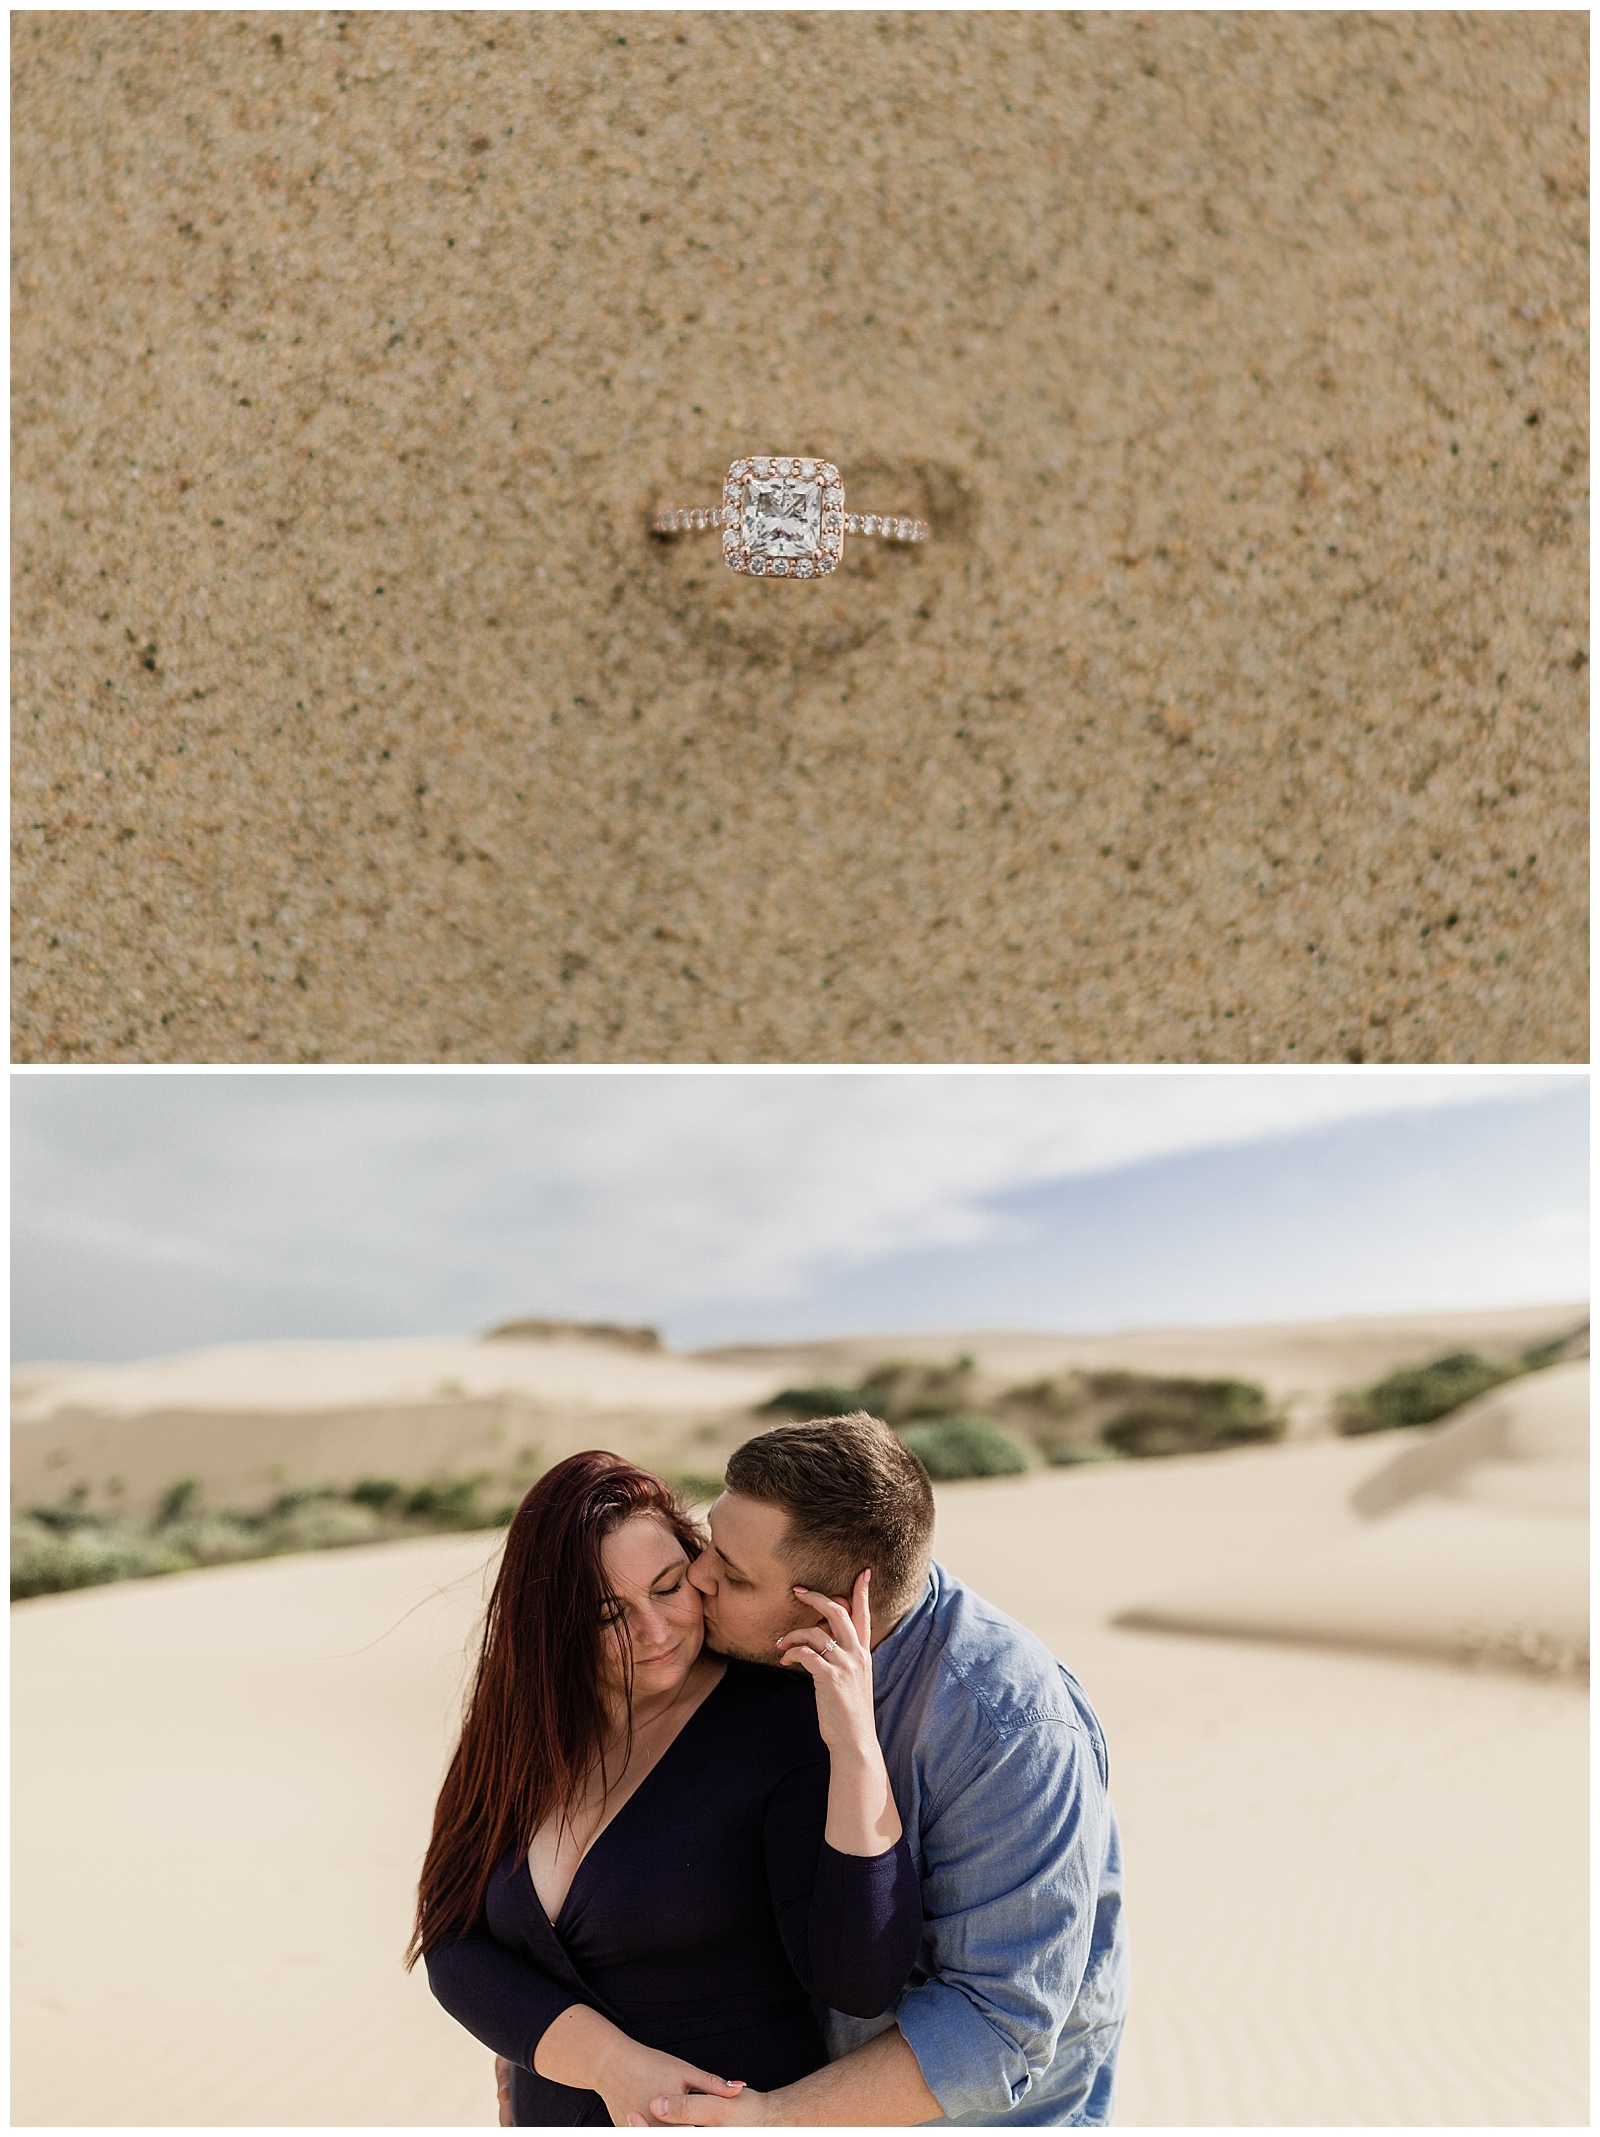 rose gold diamond engagement ring in the sand at pismo beach